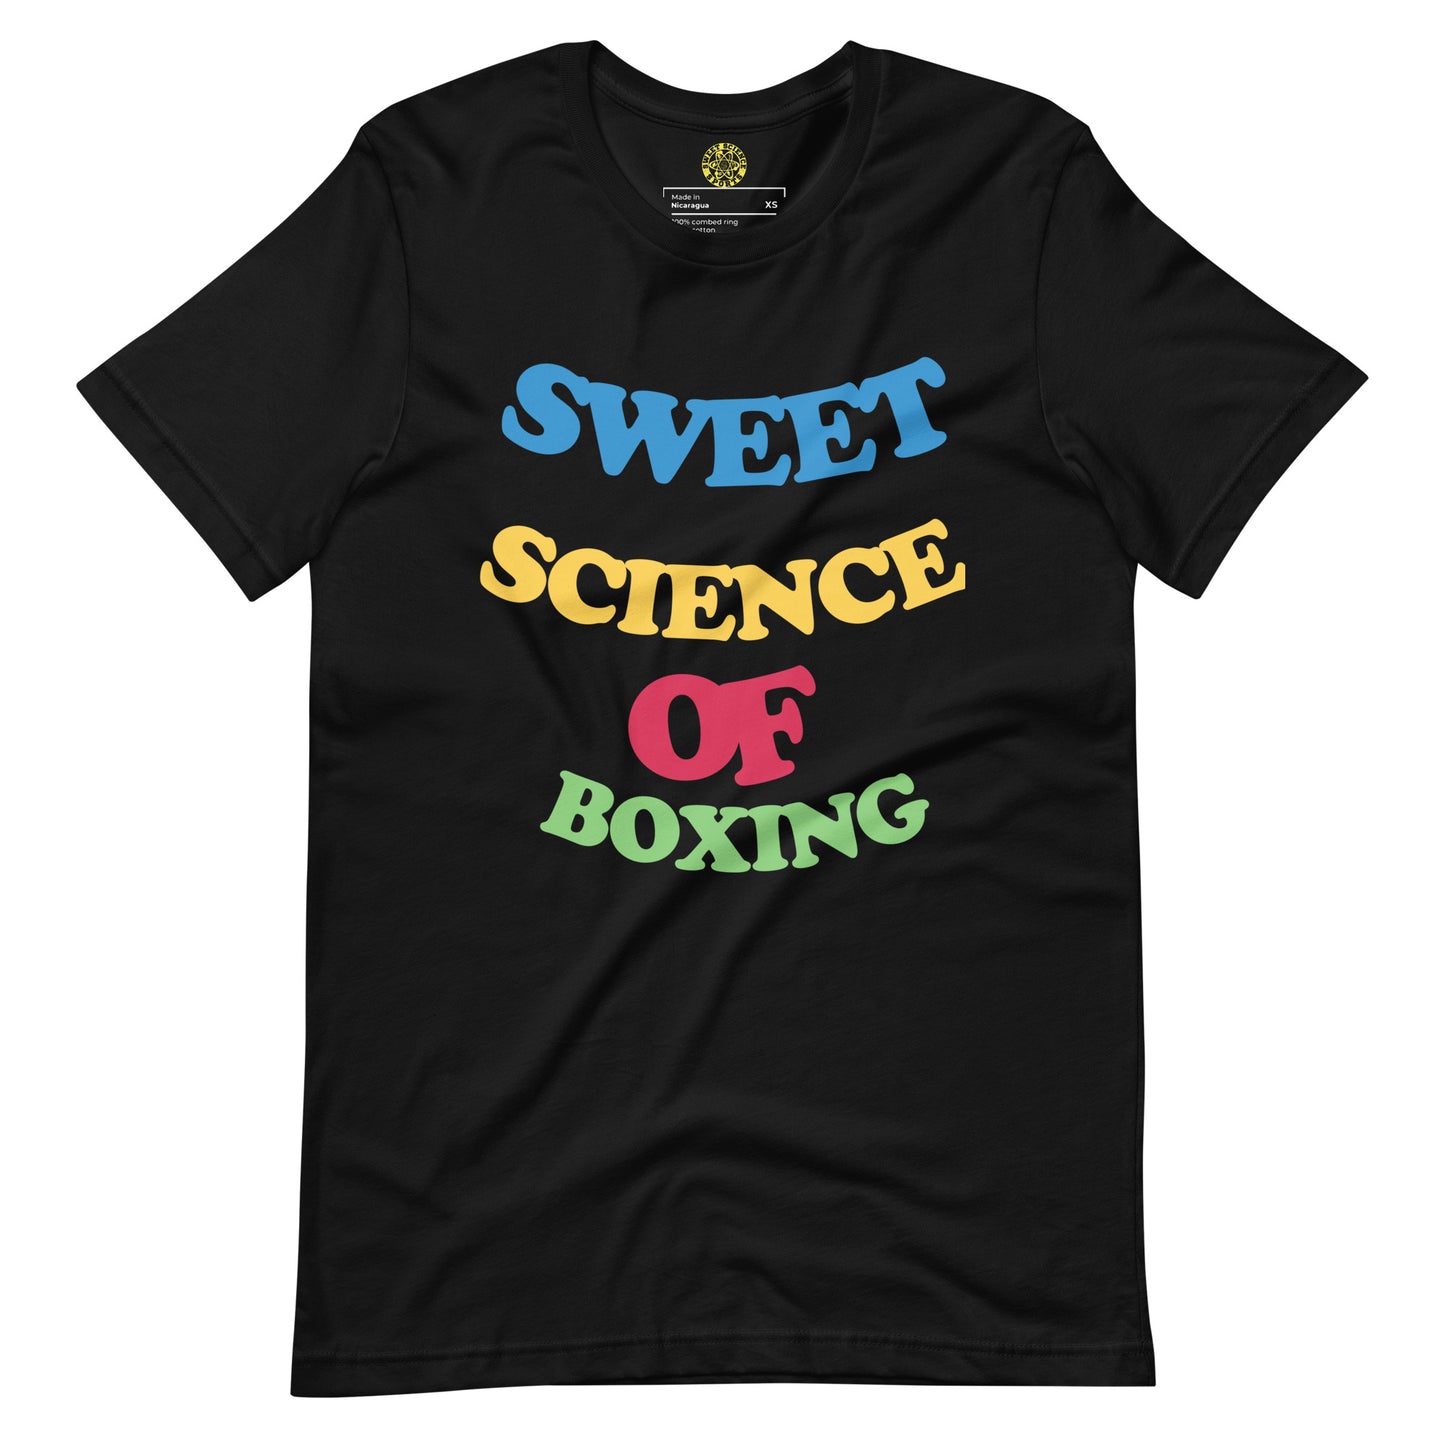 SWEET SCIENCE OF BOXING  t-shirt